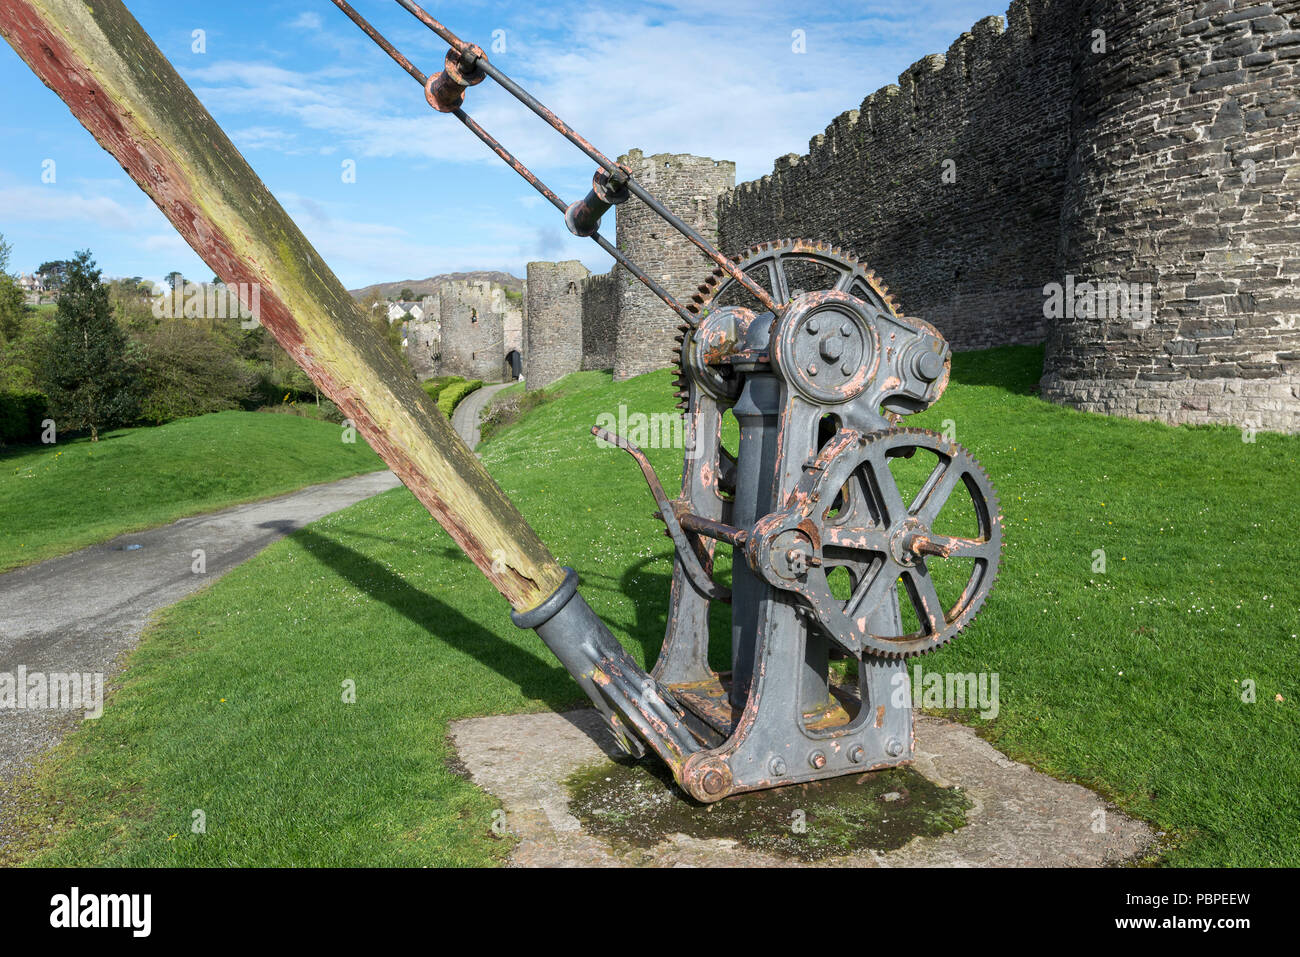 Old lifting gear beside the medieval stone walls at Conwy, North Wales, UK. Stock Photo